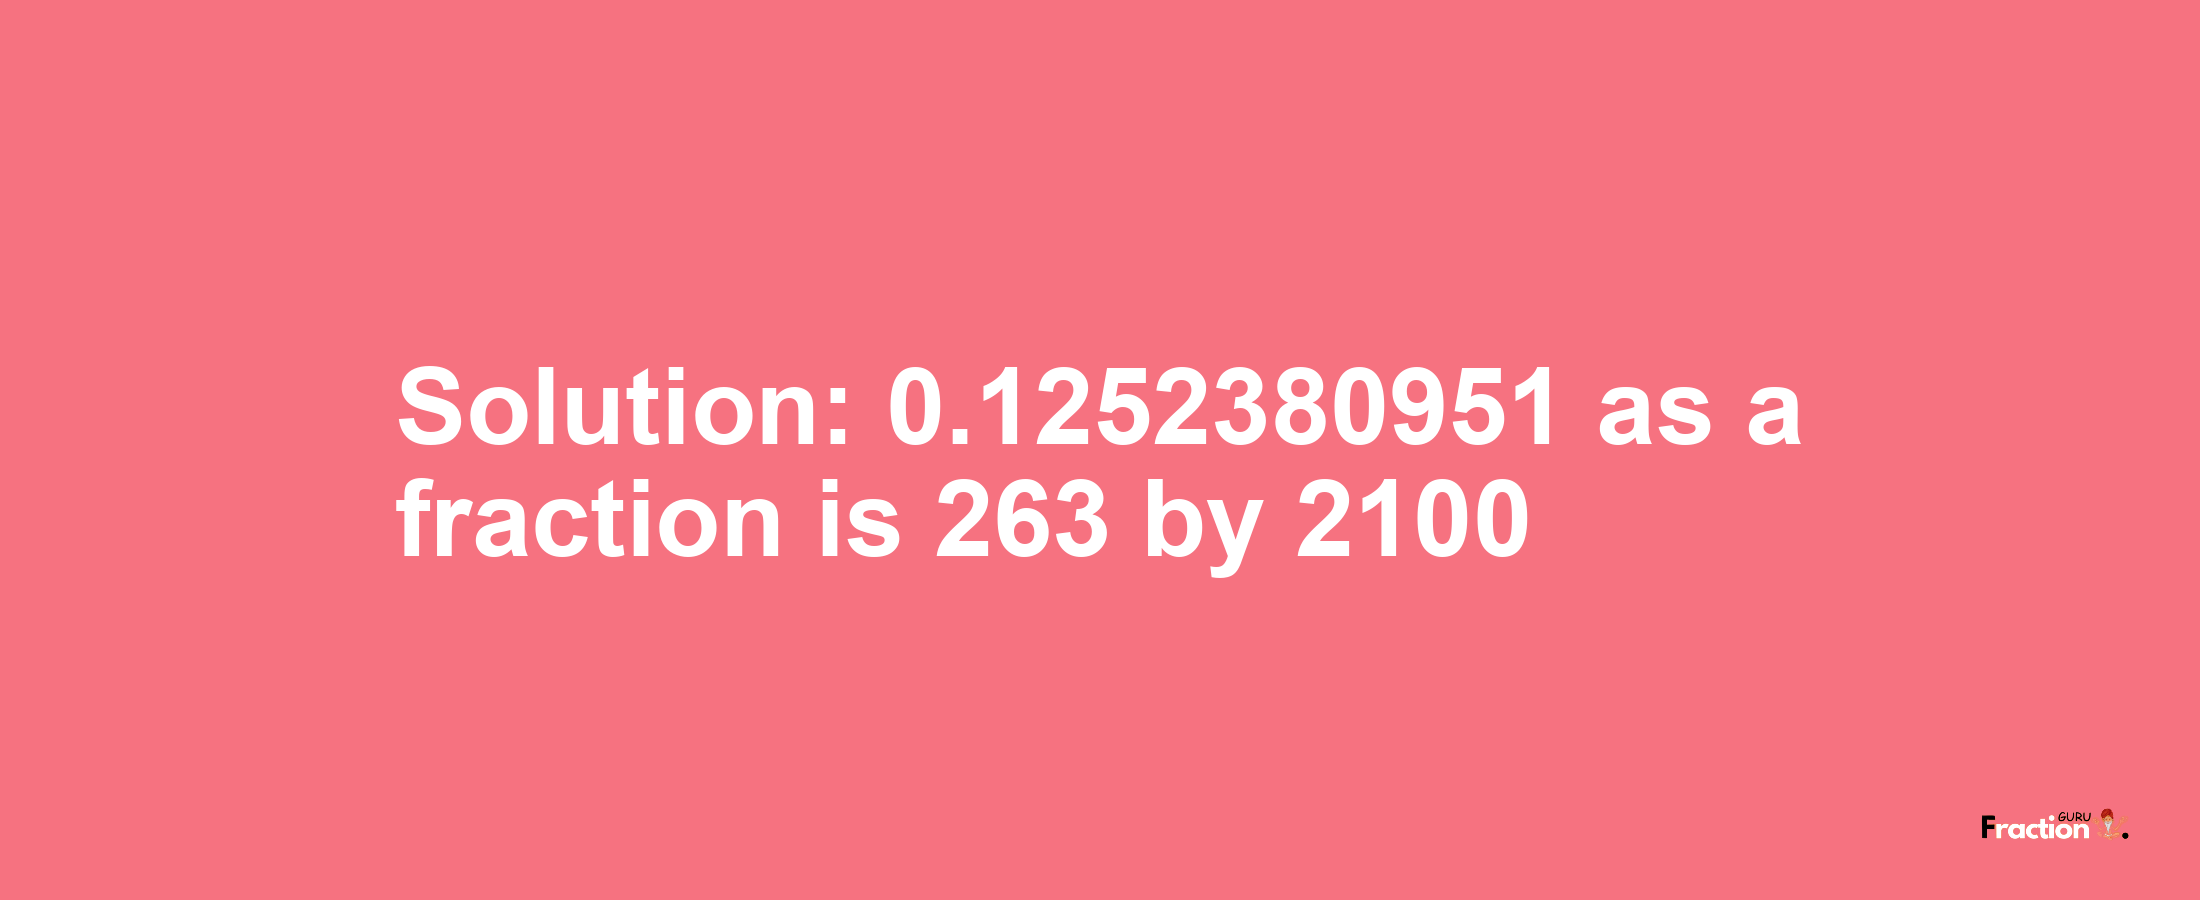 Solution:0.1252380951 as a fraction is 263/2100